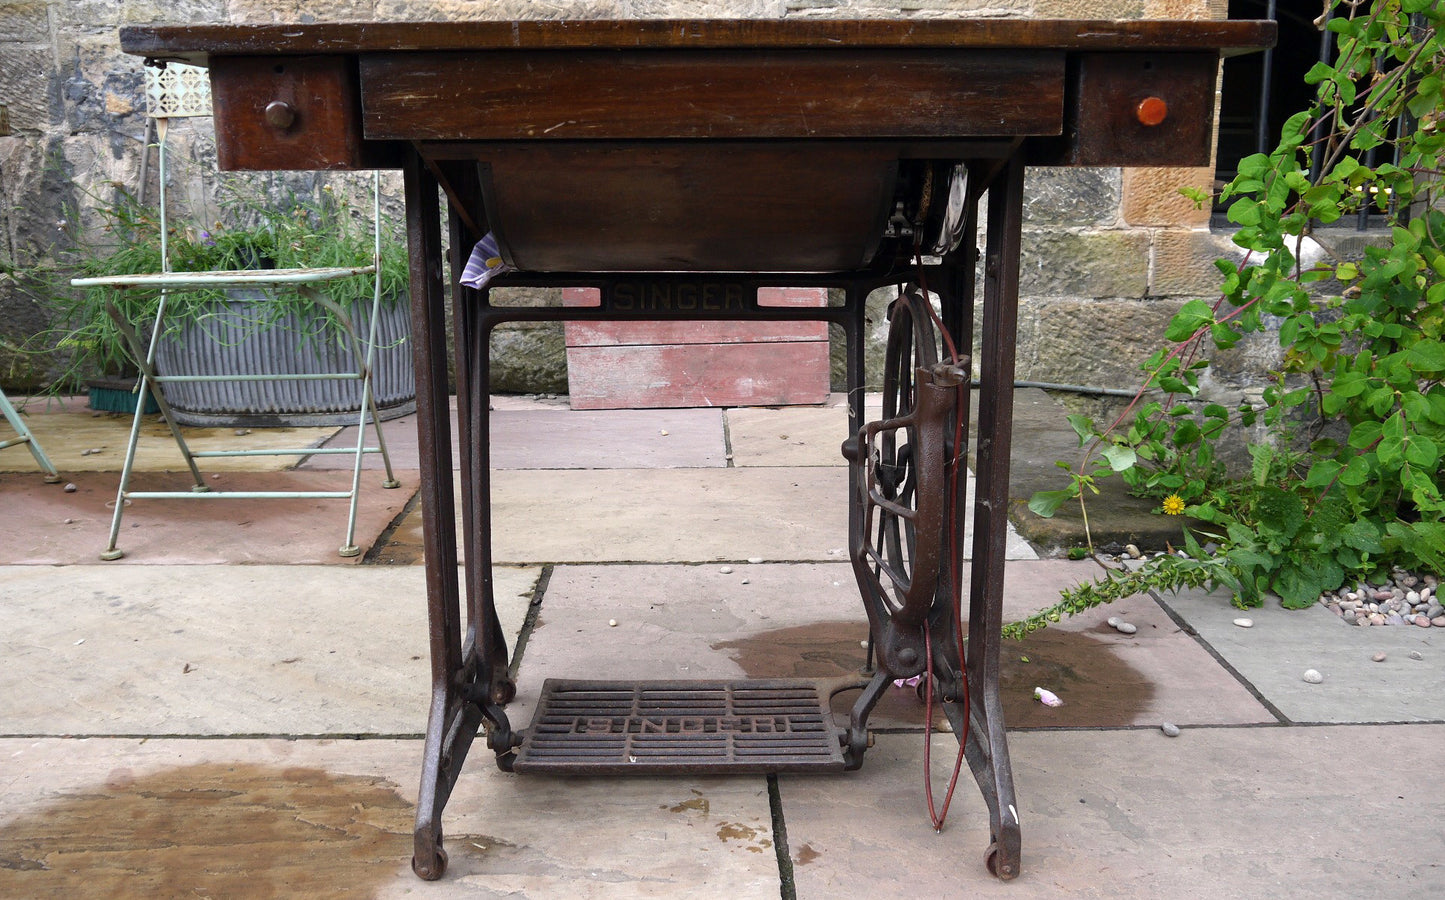 Vintage singer sewing machine and table